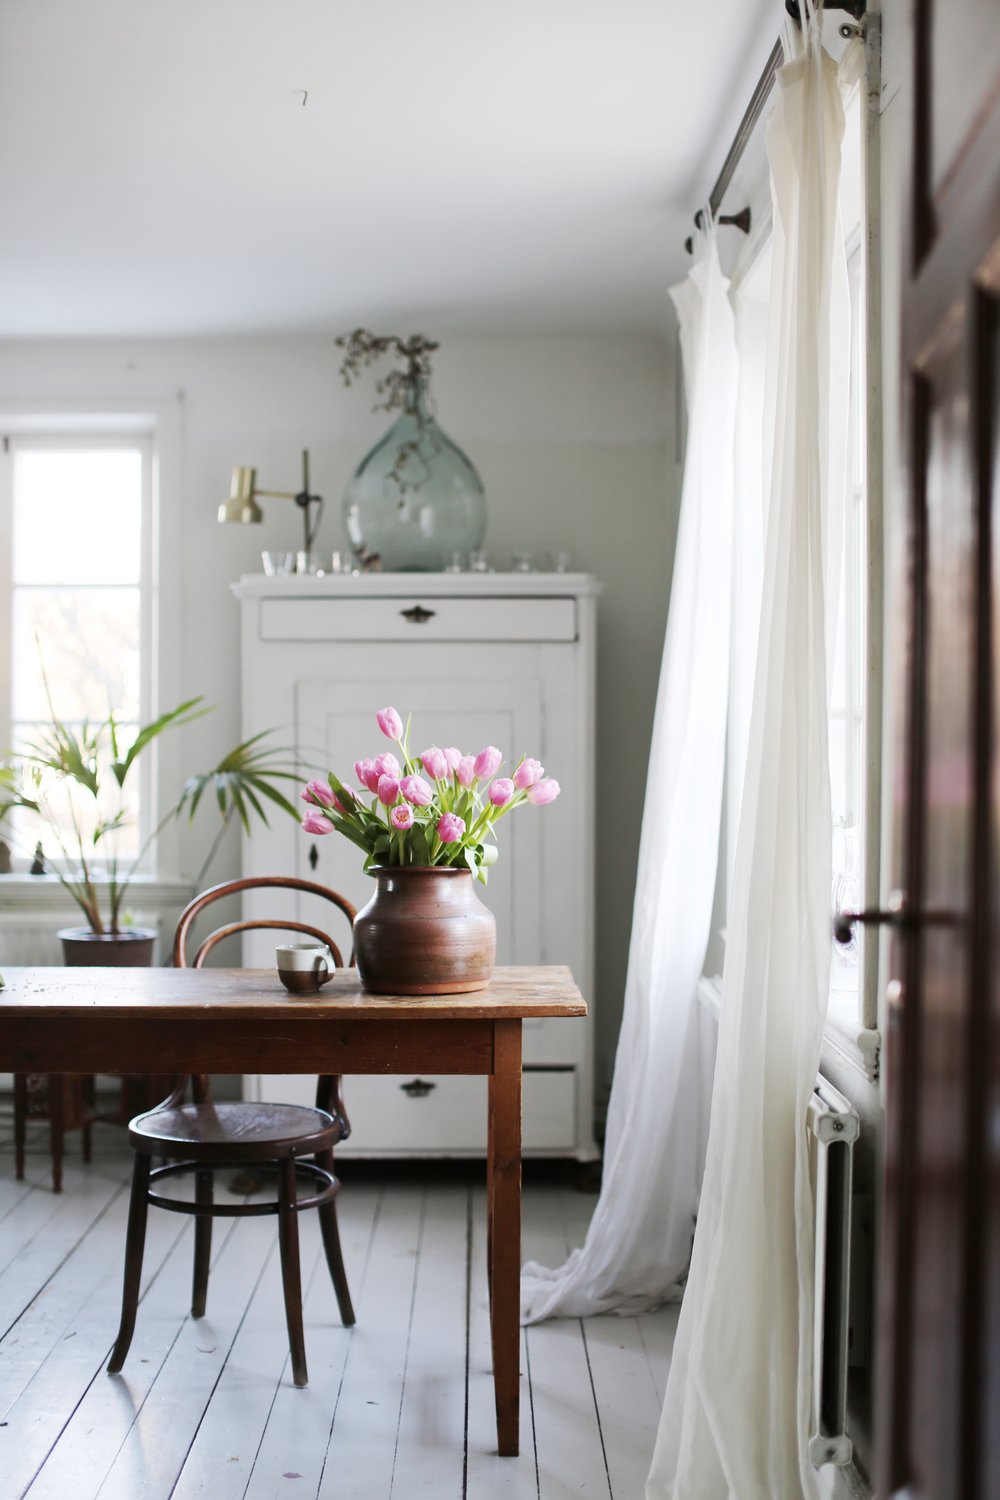 Tour the home of Interiors Author Ida Magntorn